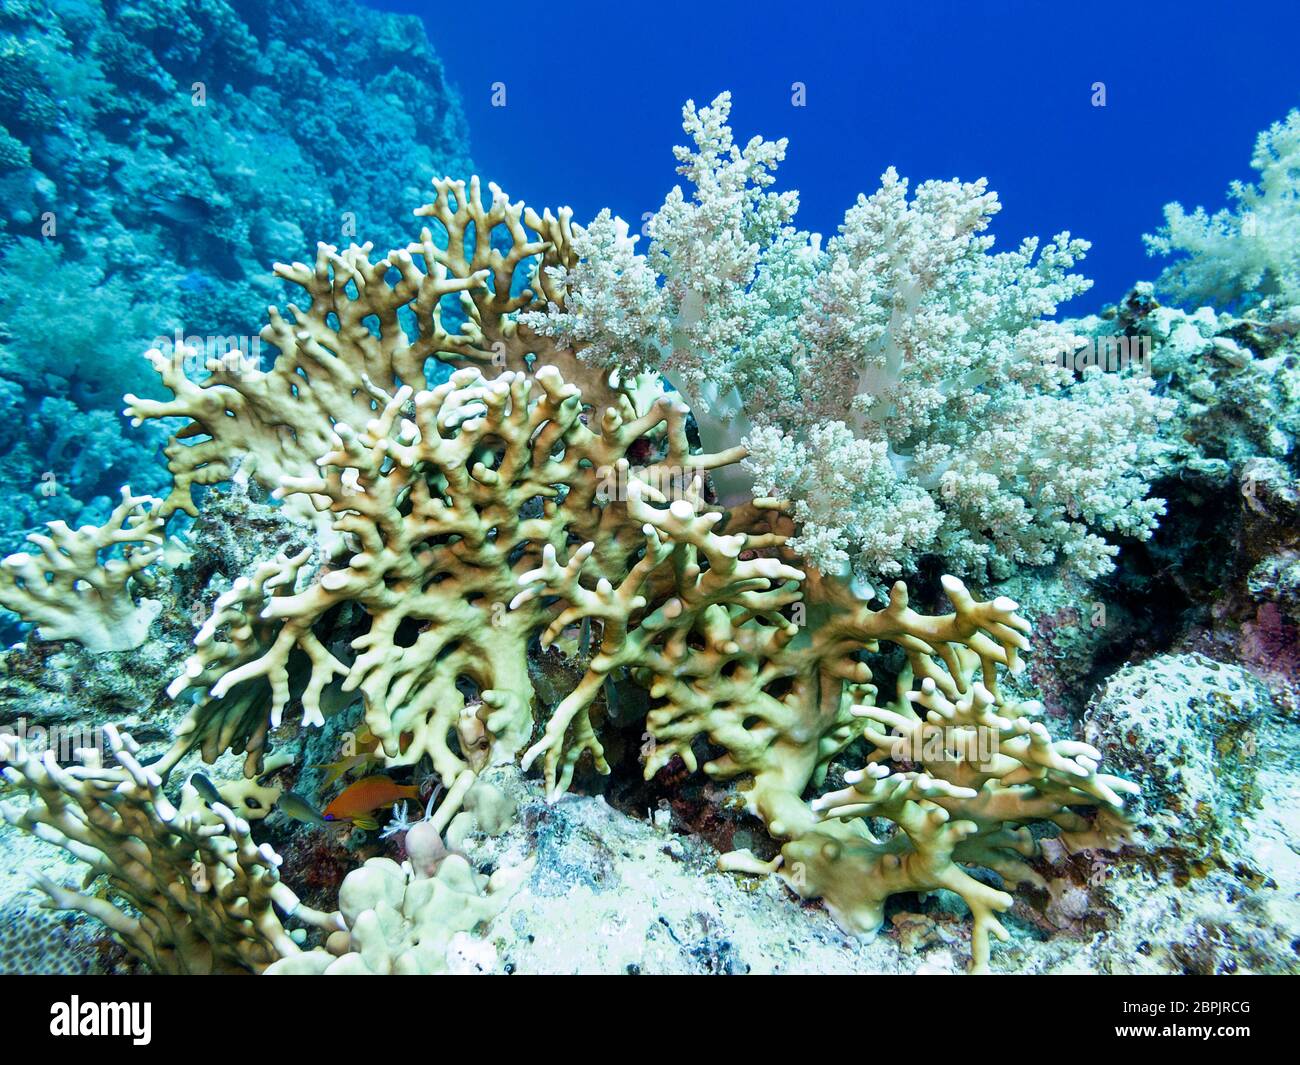 Colorful coral reef at the bottom of tropical sea, fire coral and broccoli coral, underwater landscape Stock Photo